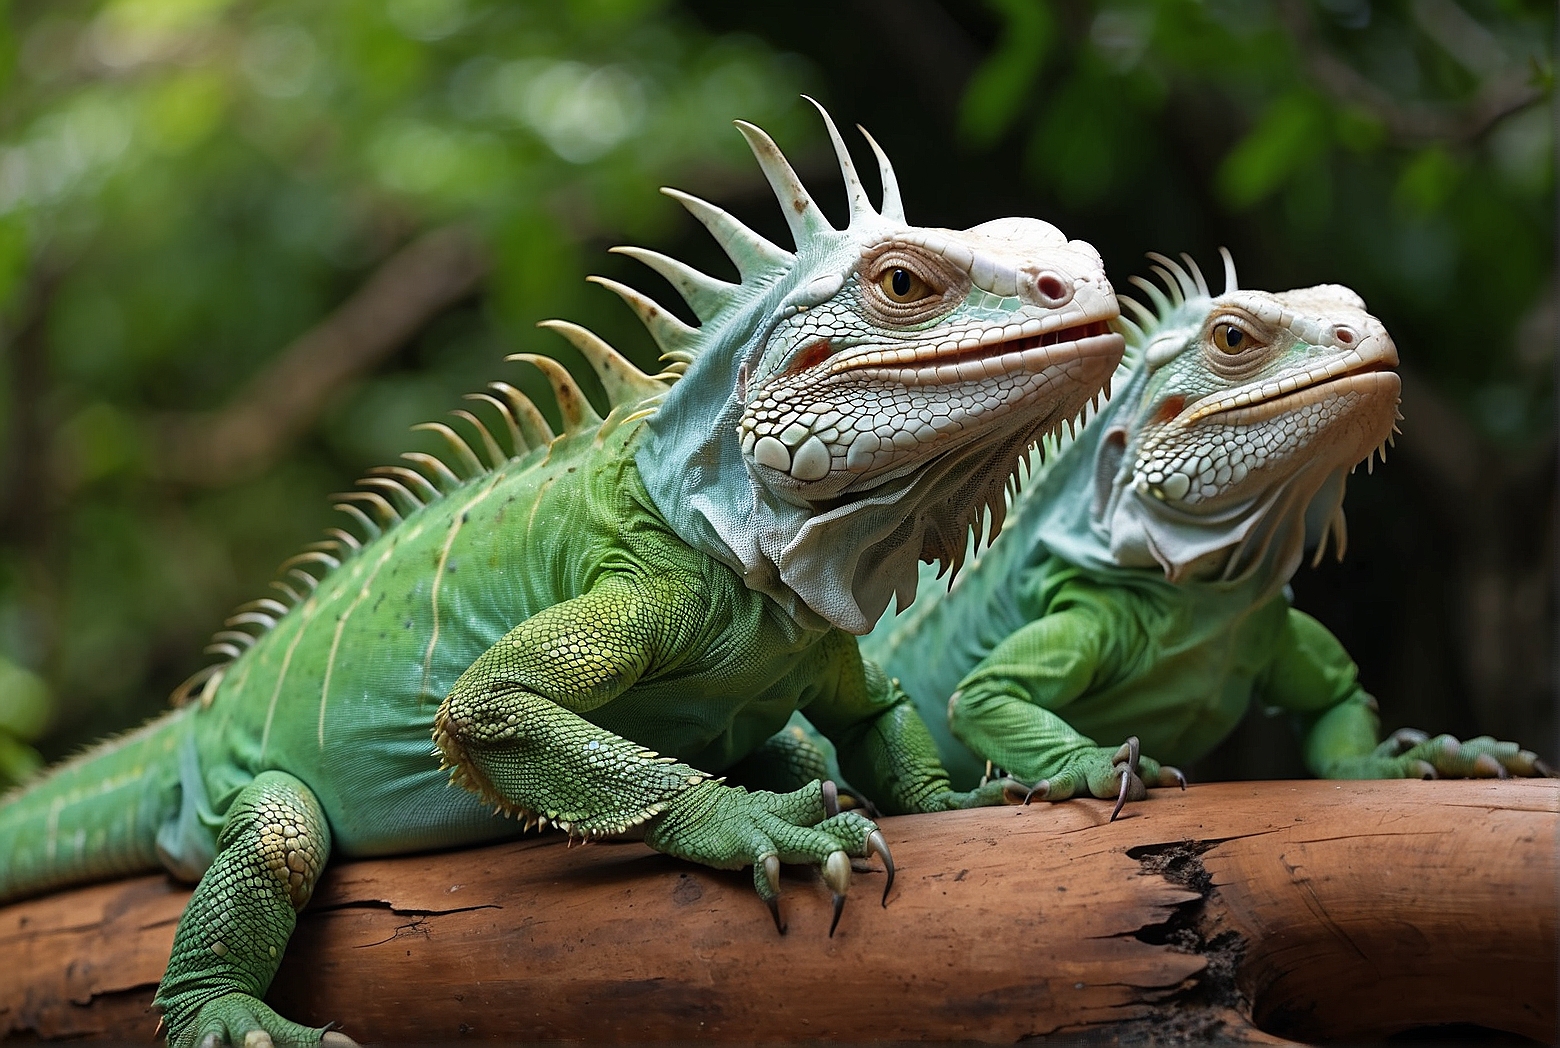 The Reproduction Habits of Green Iguanas